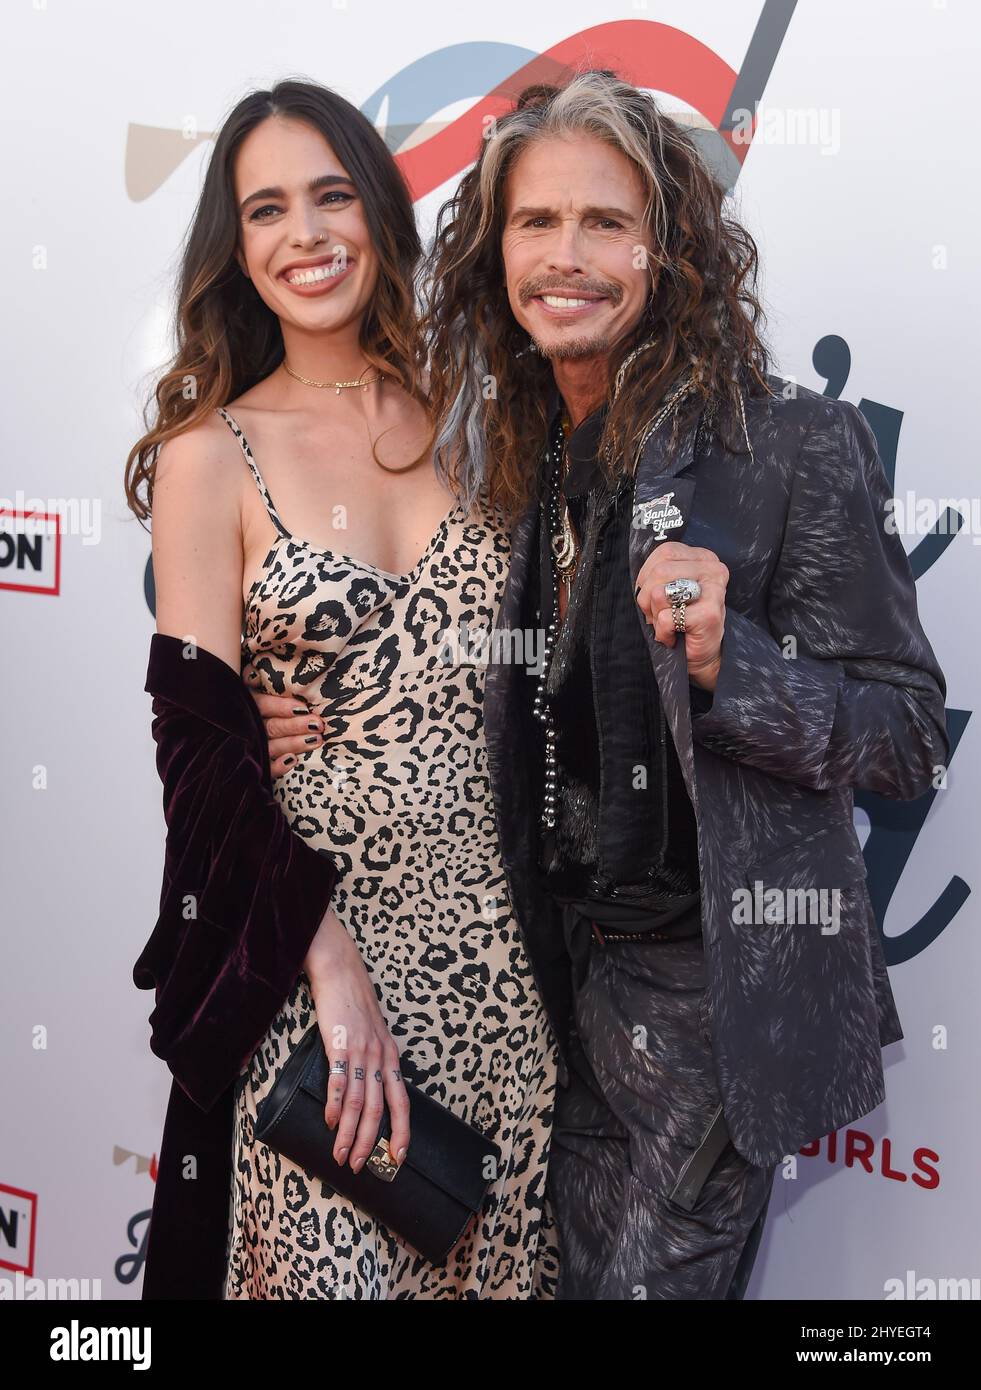 Steven Tyler - CHELSEA YOU MAKE SURE OUR GENES NEVER GO OUT OF  STYLEPLEASE PASS THE DNA MUCH??? HAPPY BIRTHDAY MY LOVELY ❤